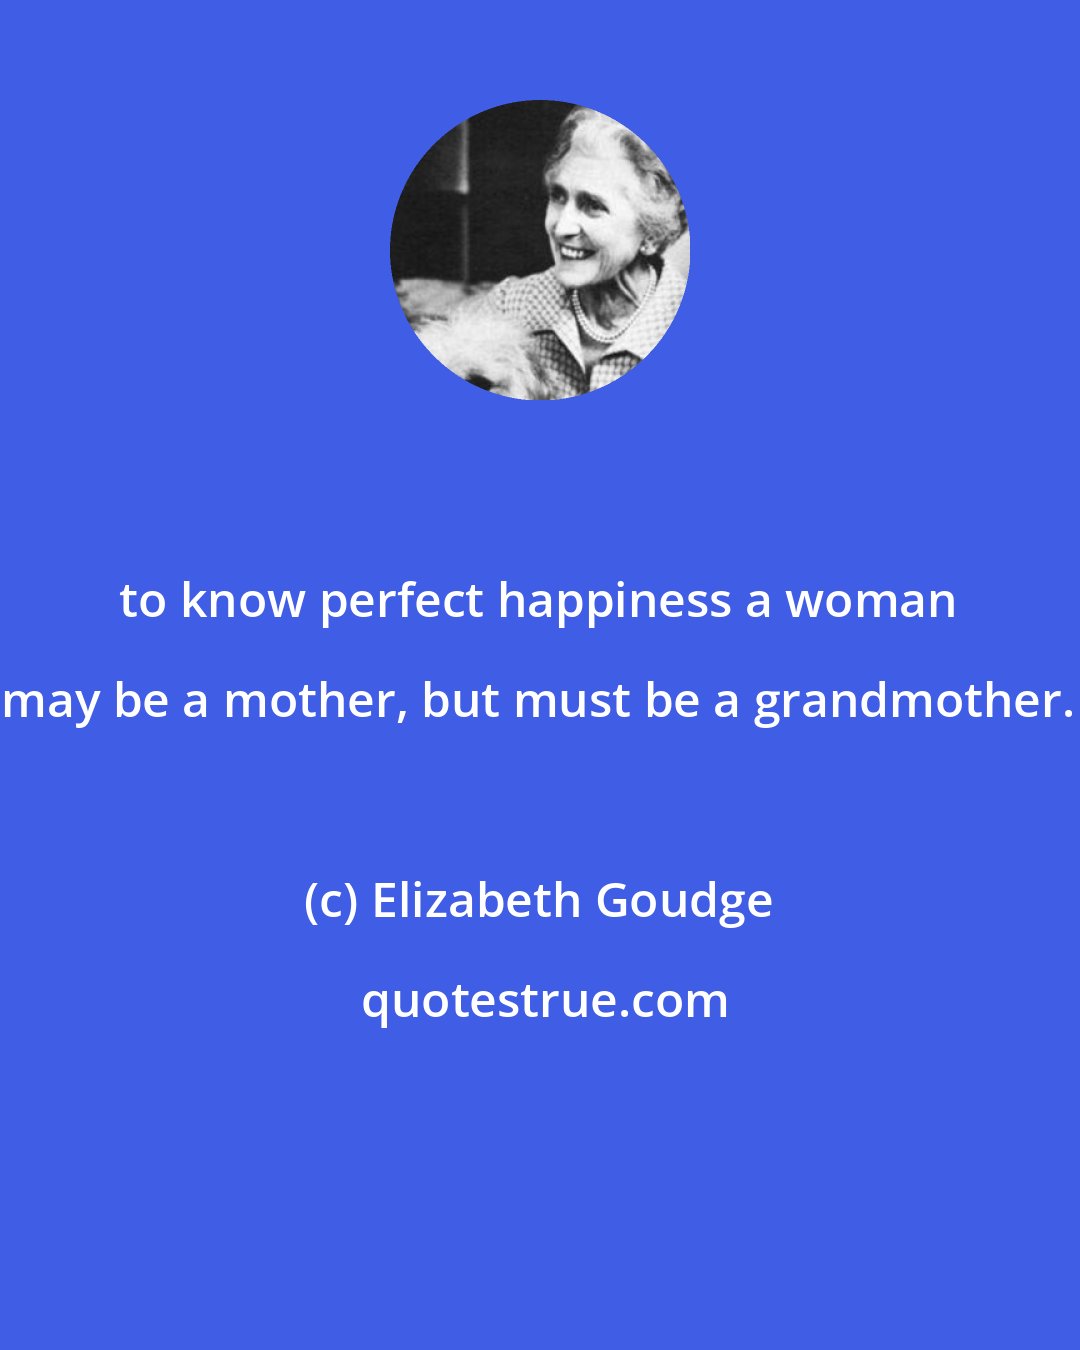 Elizabeth Goudge: to know perfect happiness a woman may be a mother, but must be a grandmother.